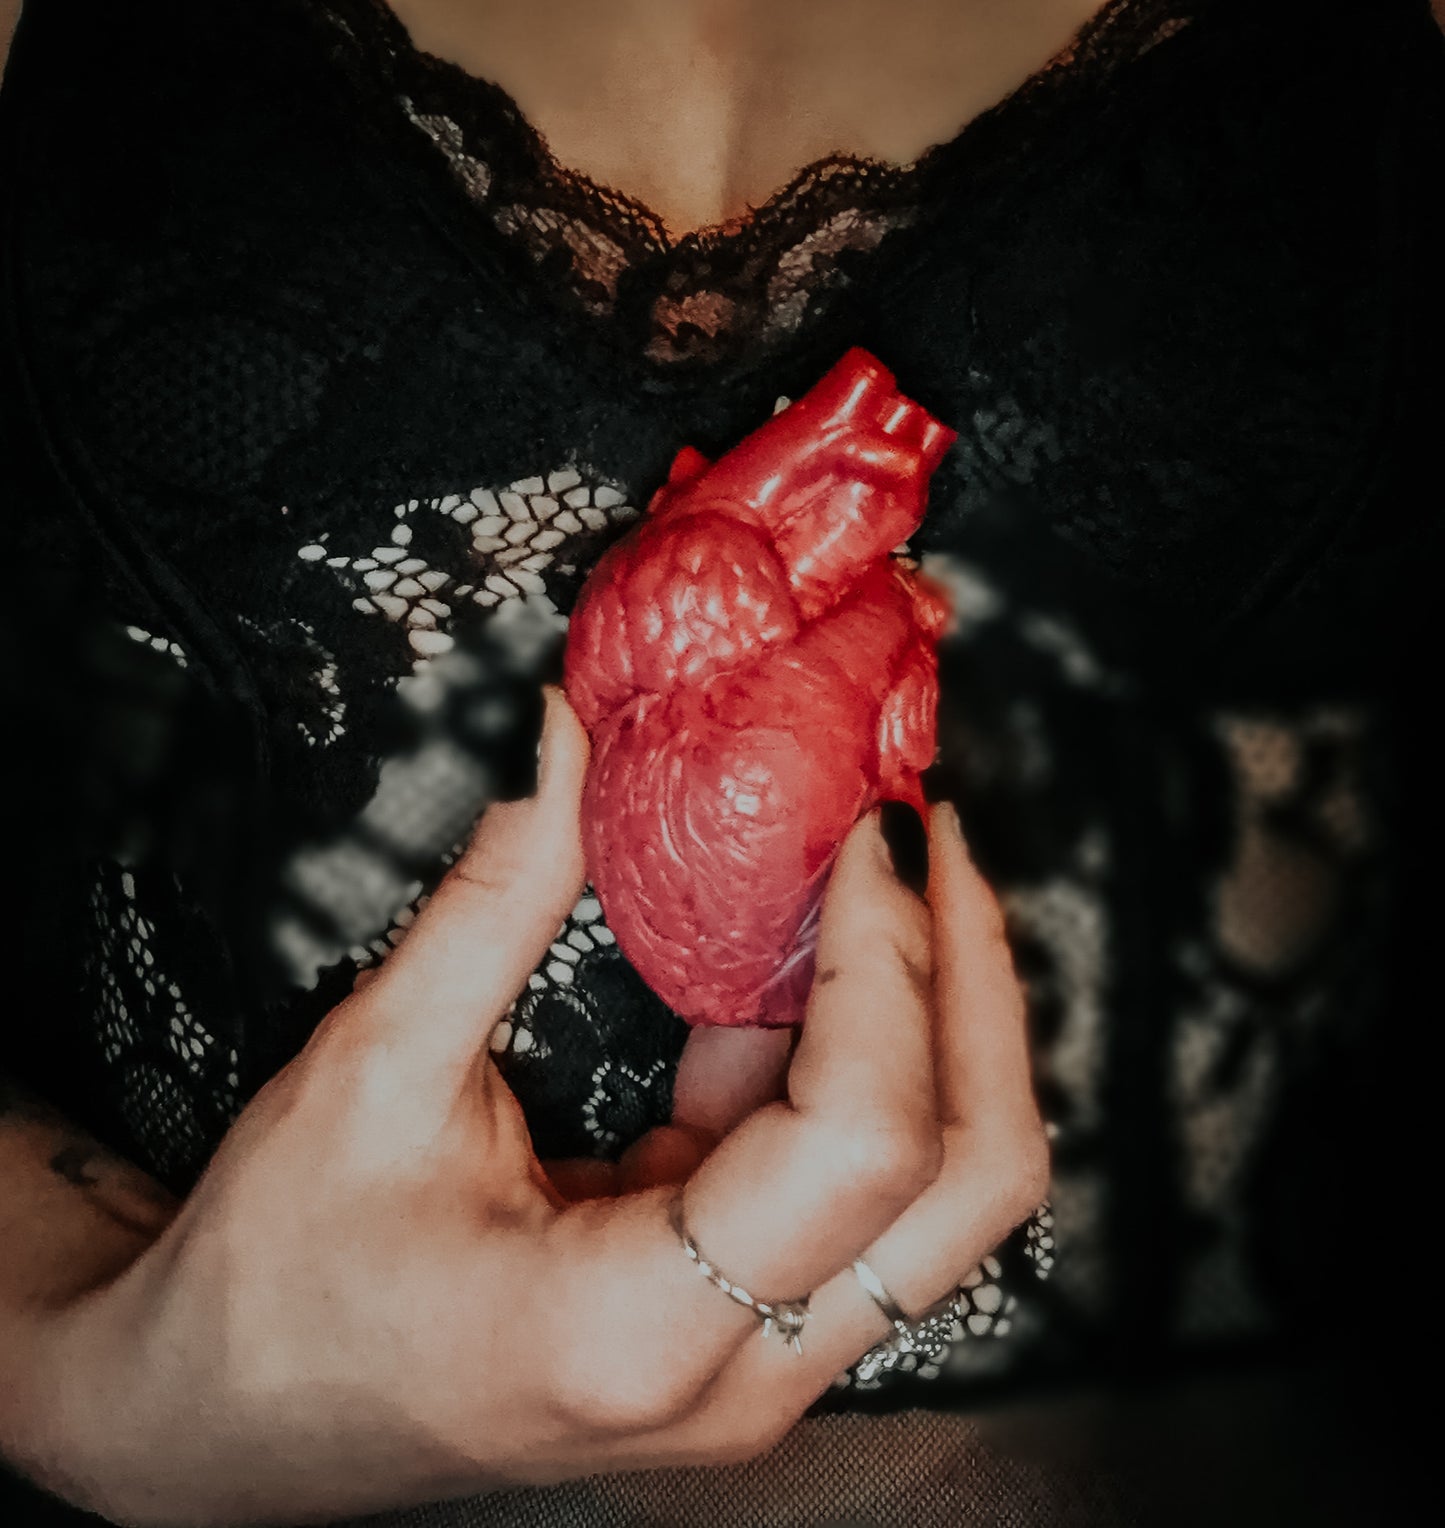 Anatomical heart,Human heart shape candle, Witch Candle,free perfume sample, Gothic,witchcore , Unique Gift,Decorative Candle, Victorian candles, folk, tattoo, horror,Bleeding candle